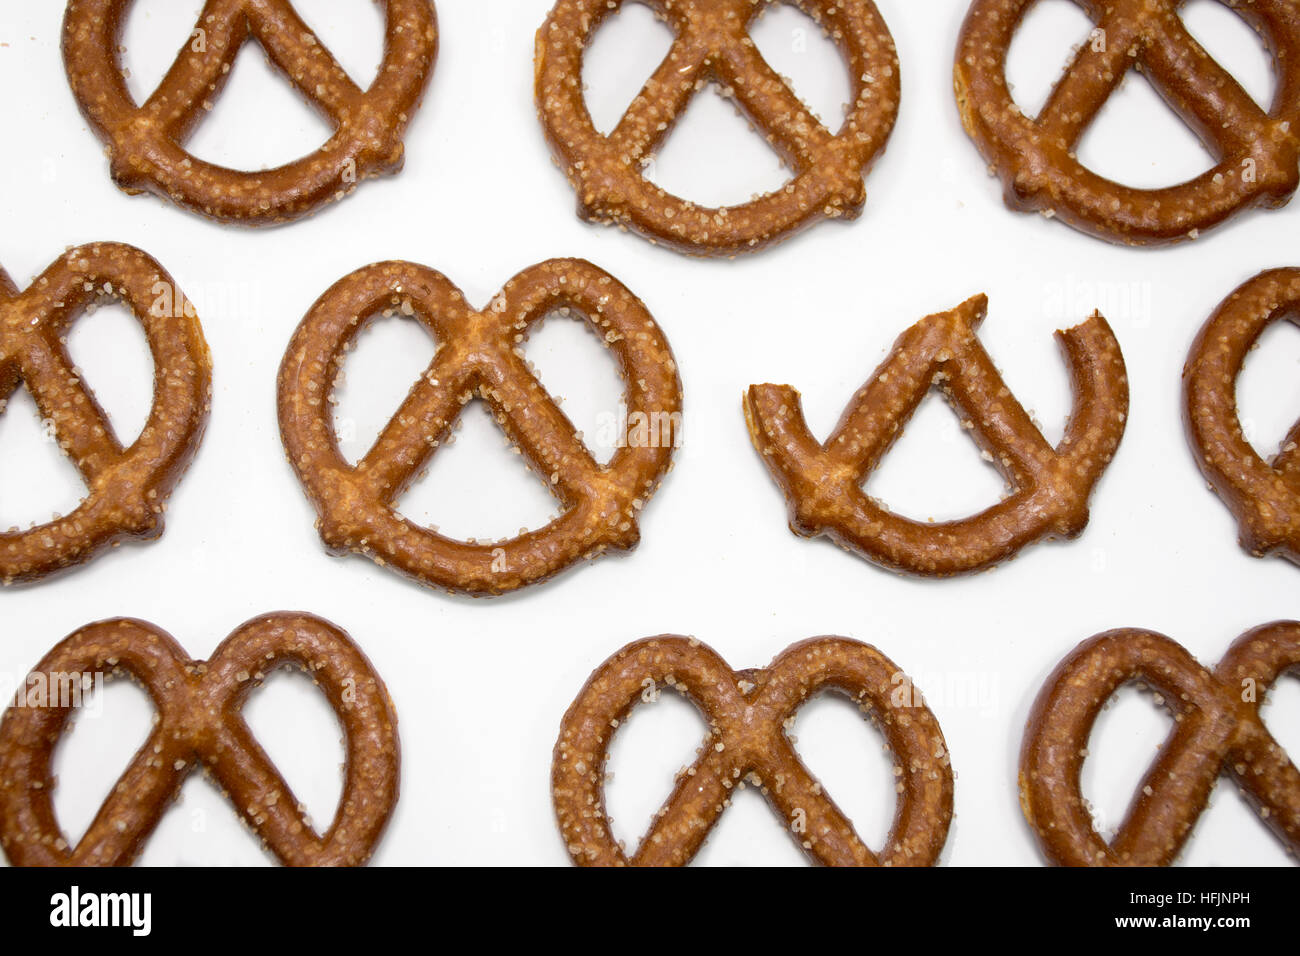 different concept - one eaten pretzel among a lot of perfect pretzels ordered on a white background Stock Photo